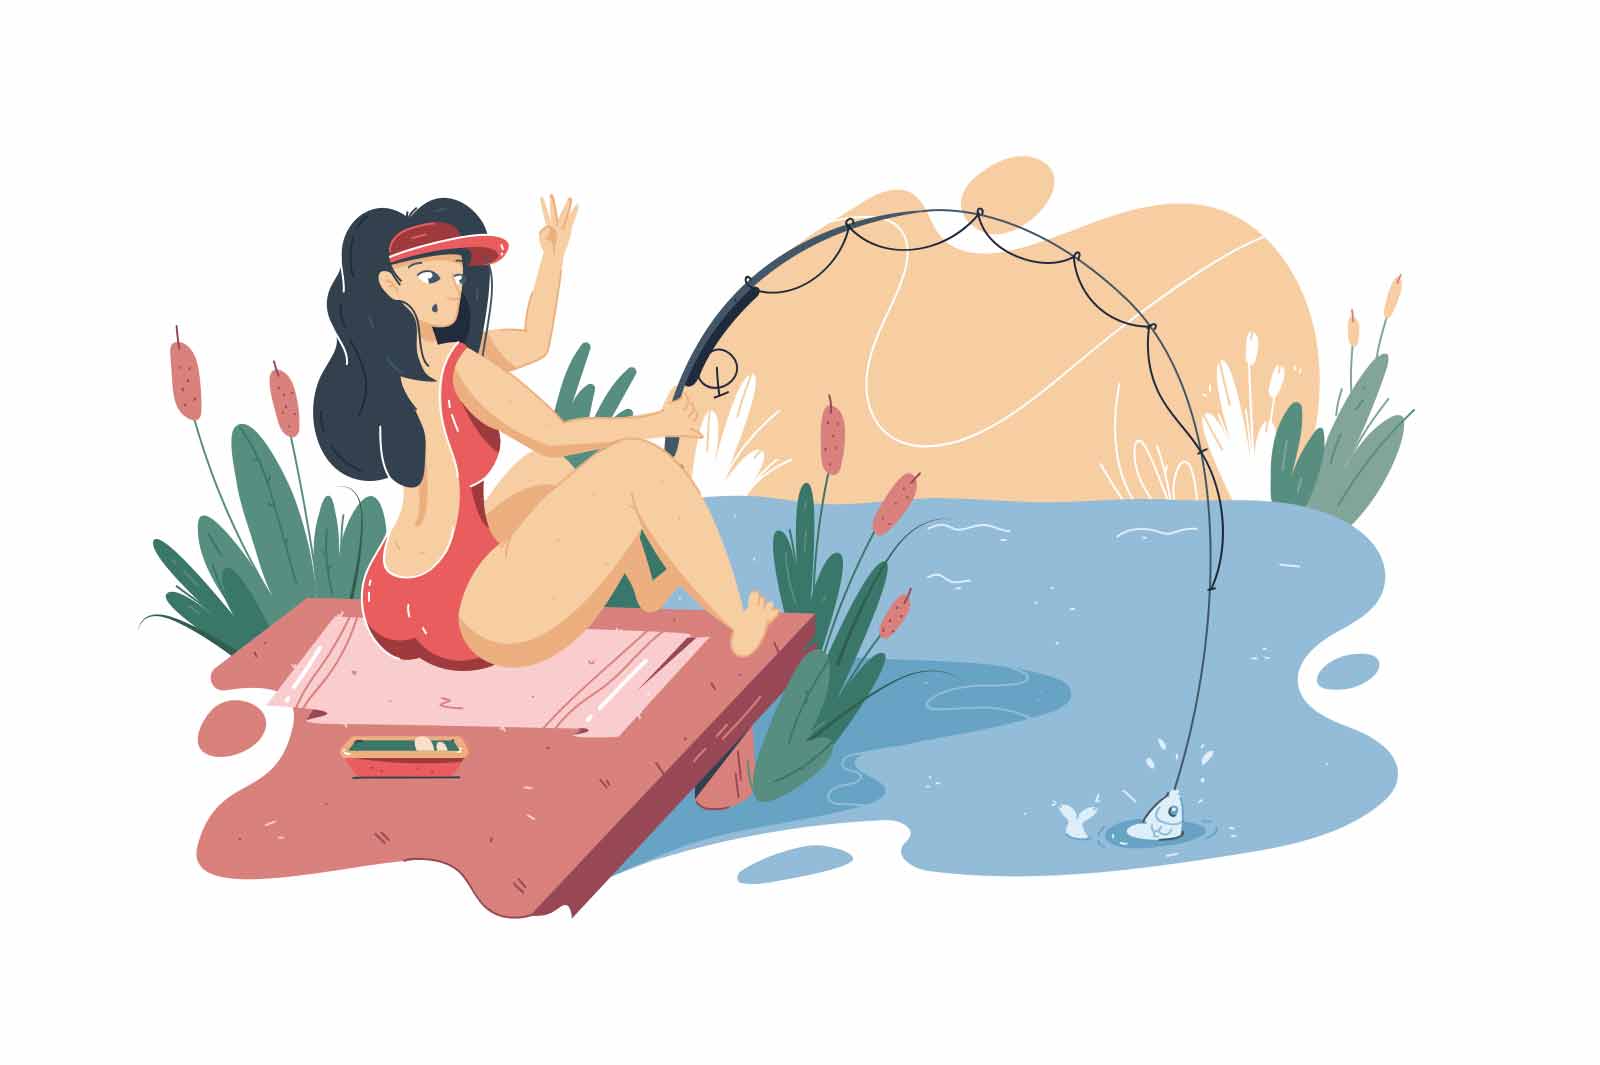 Cute woman fishing on river bank vector illustration. Female in swimsuit catching fish flat style concept. Hobby and lifestyle idea